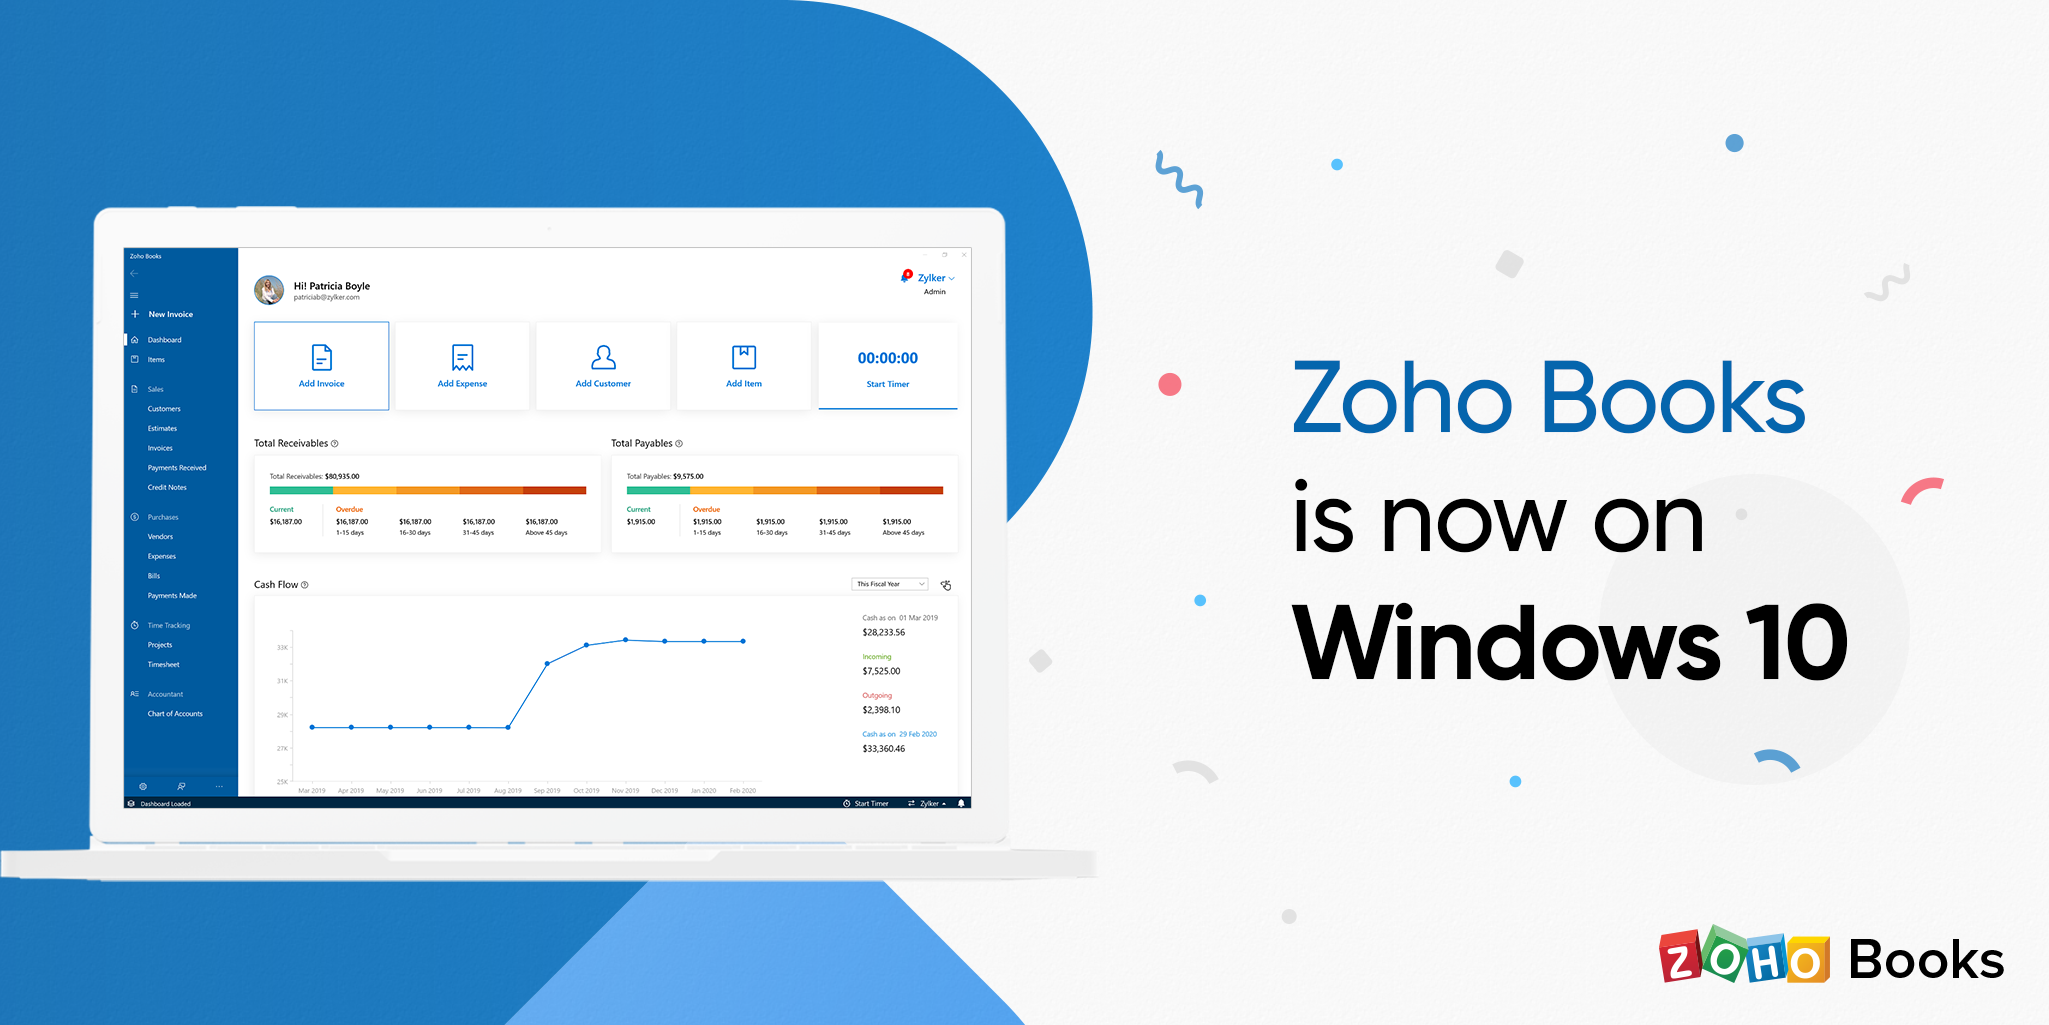 Presenting the all-new Zoho Books app for Windows 10